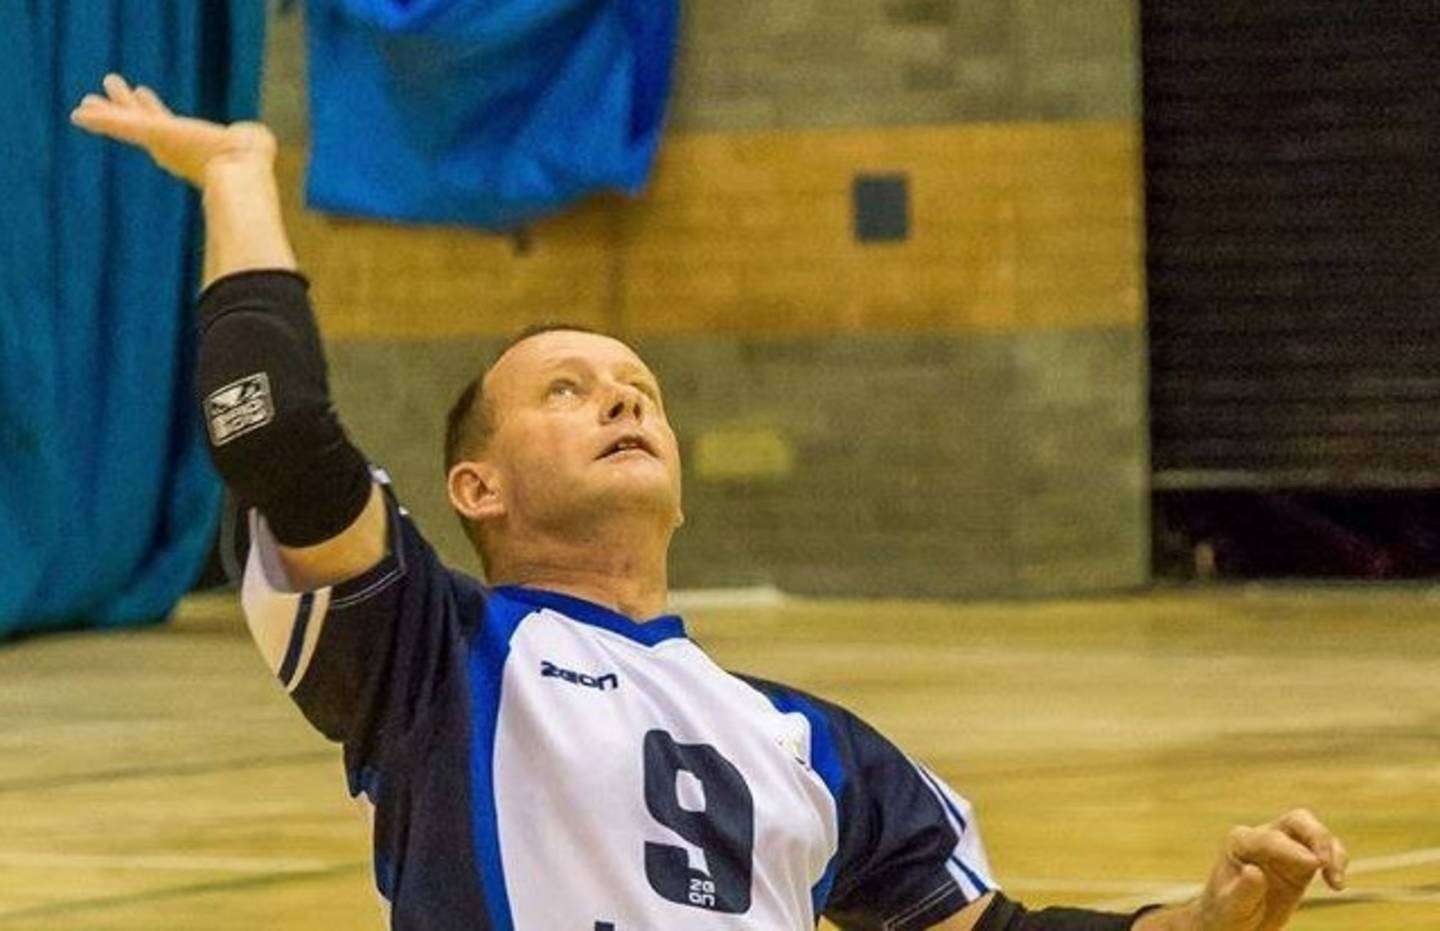 Mike Stoneman, sitting volleyball player